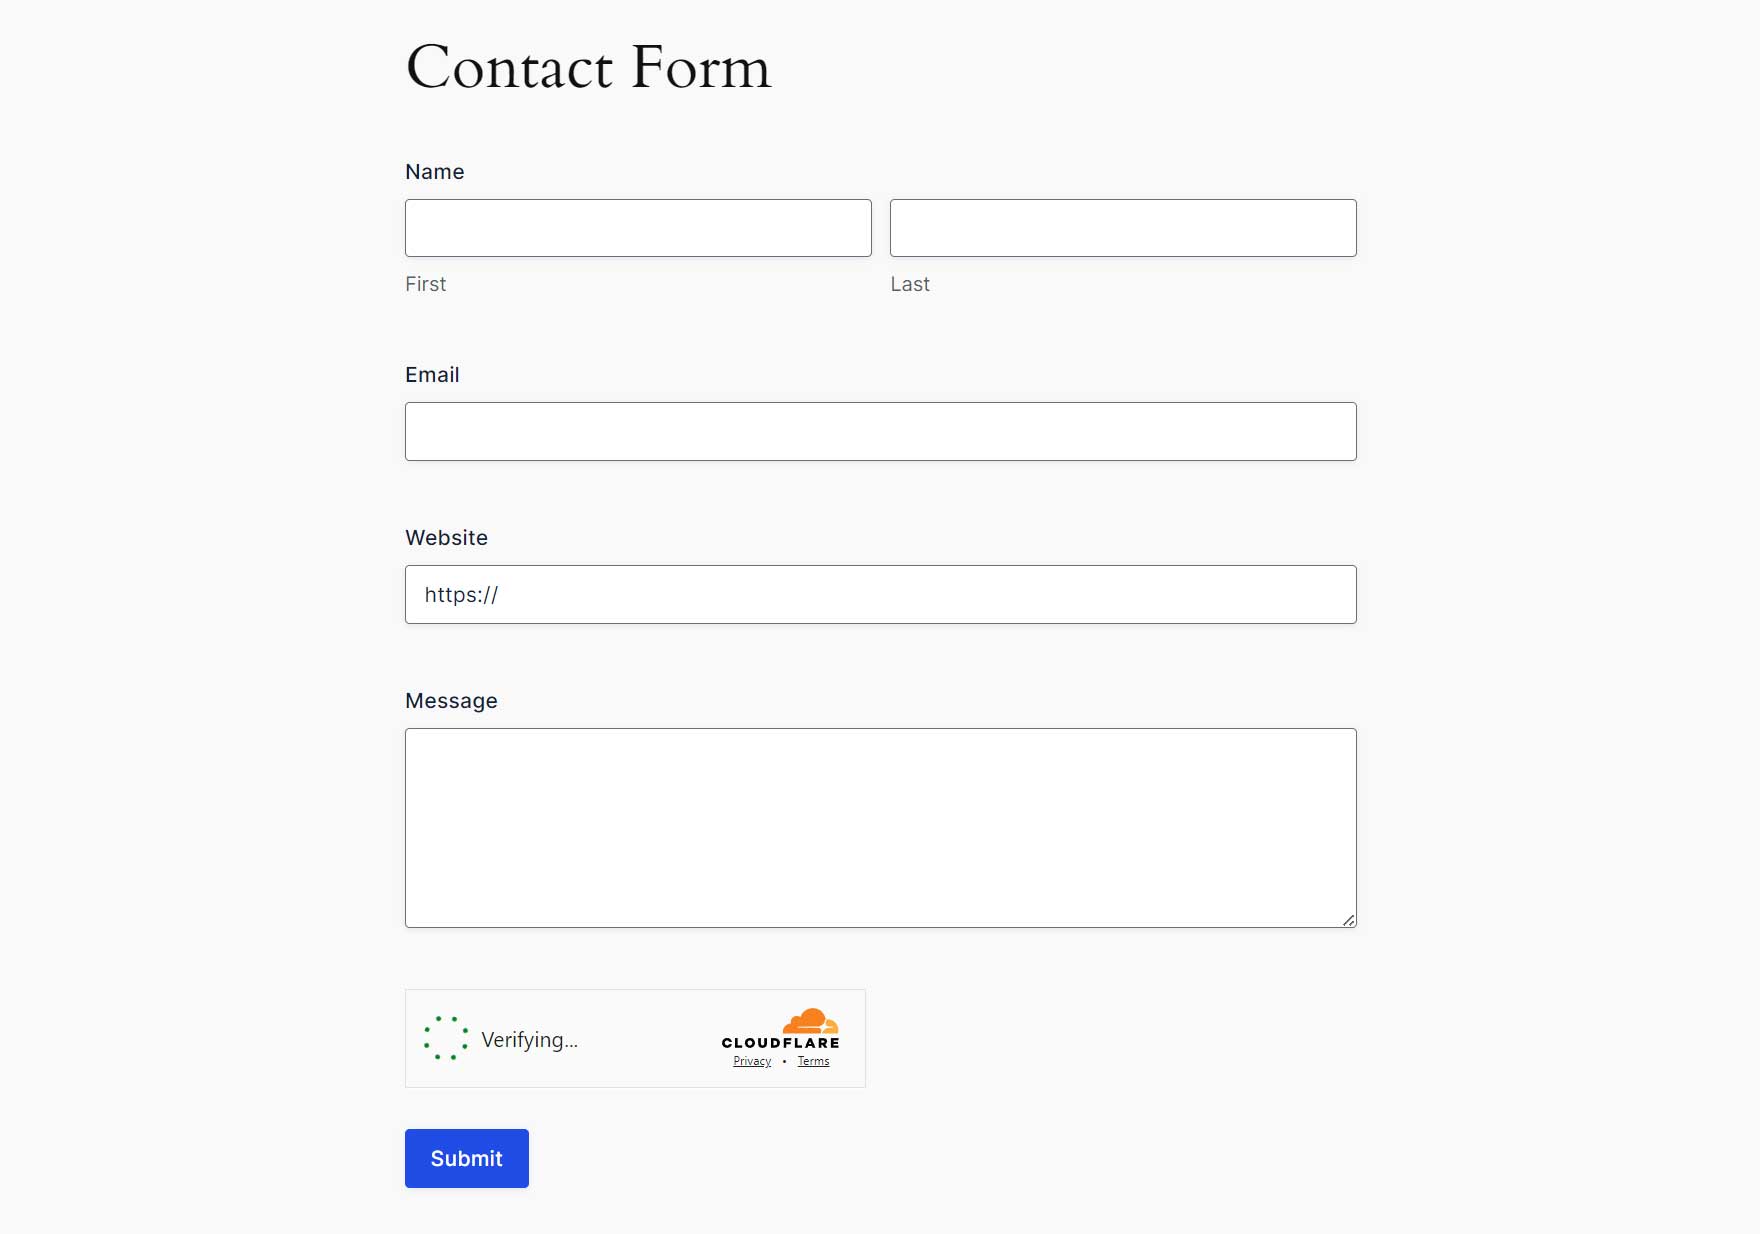 Published Cloudflare Form Example